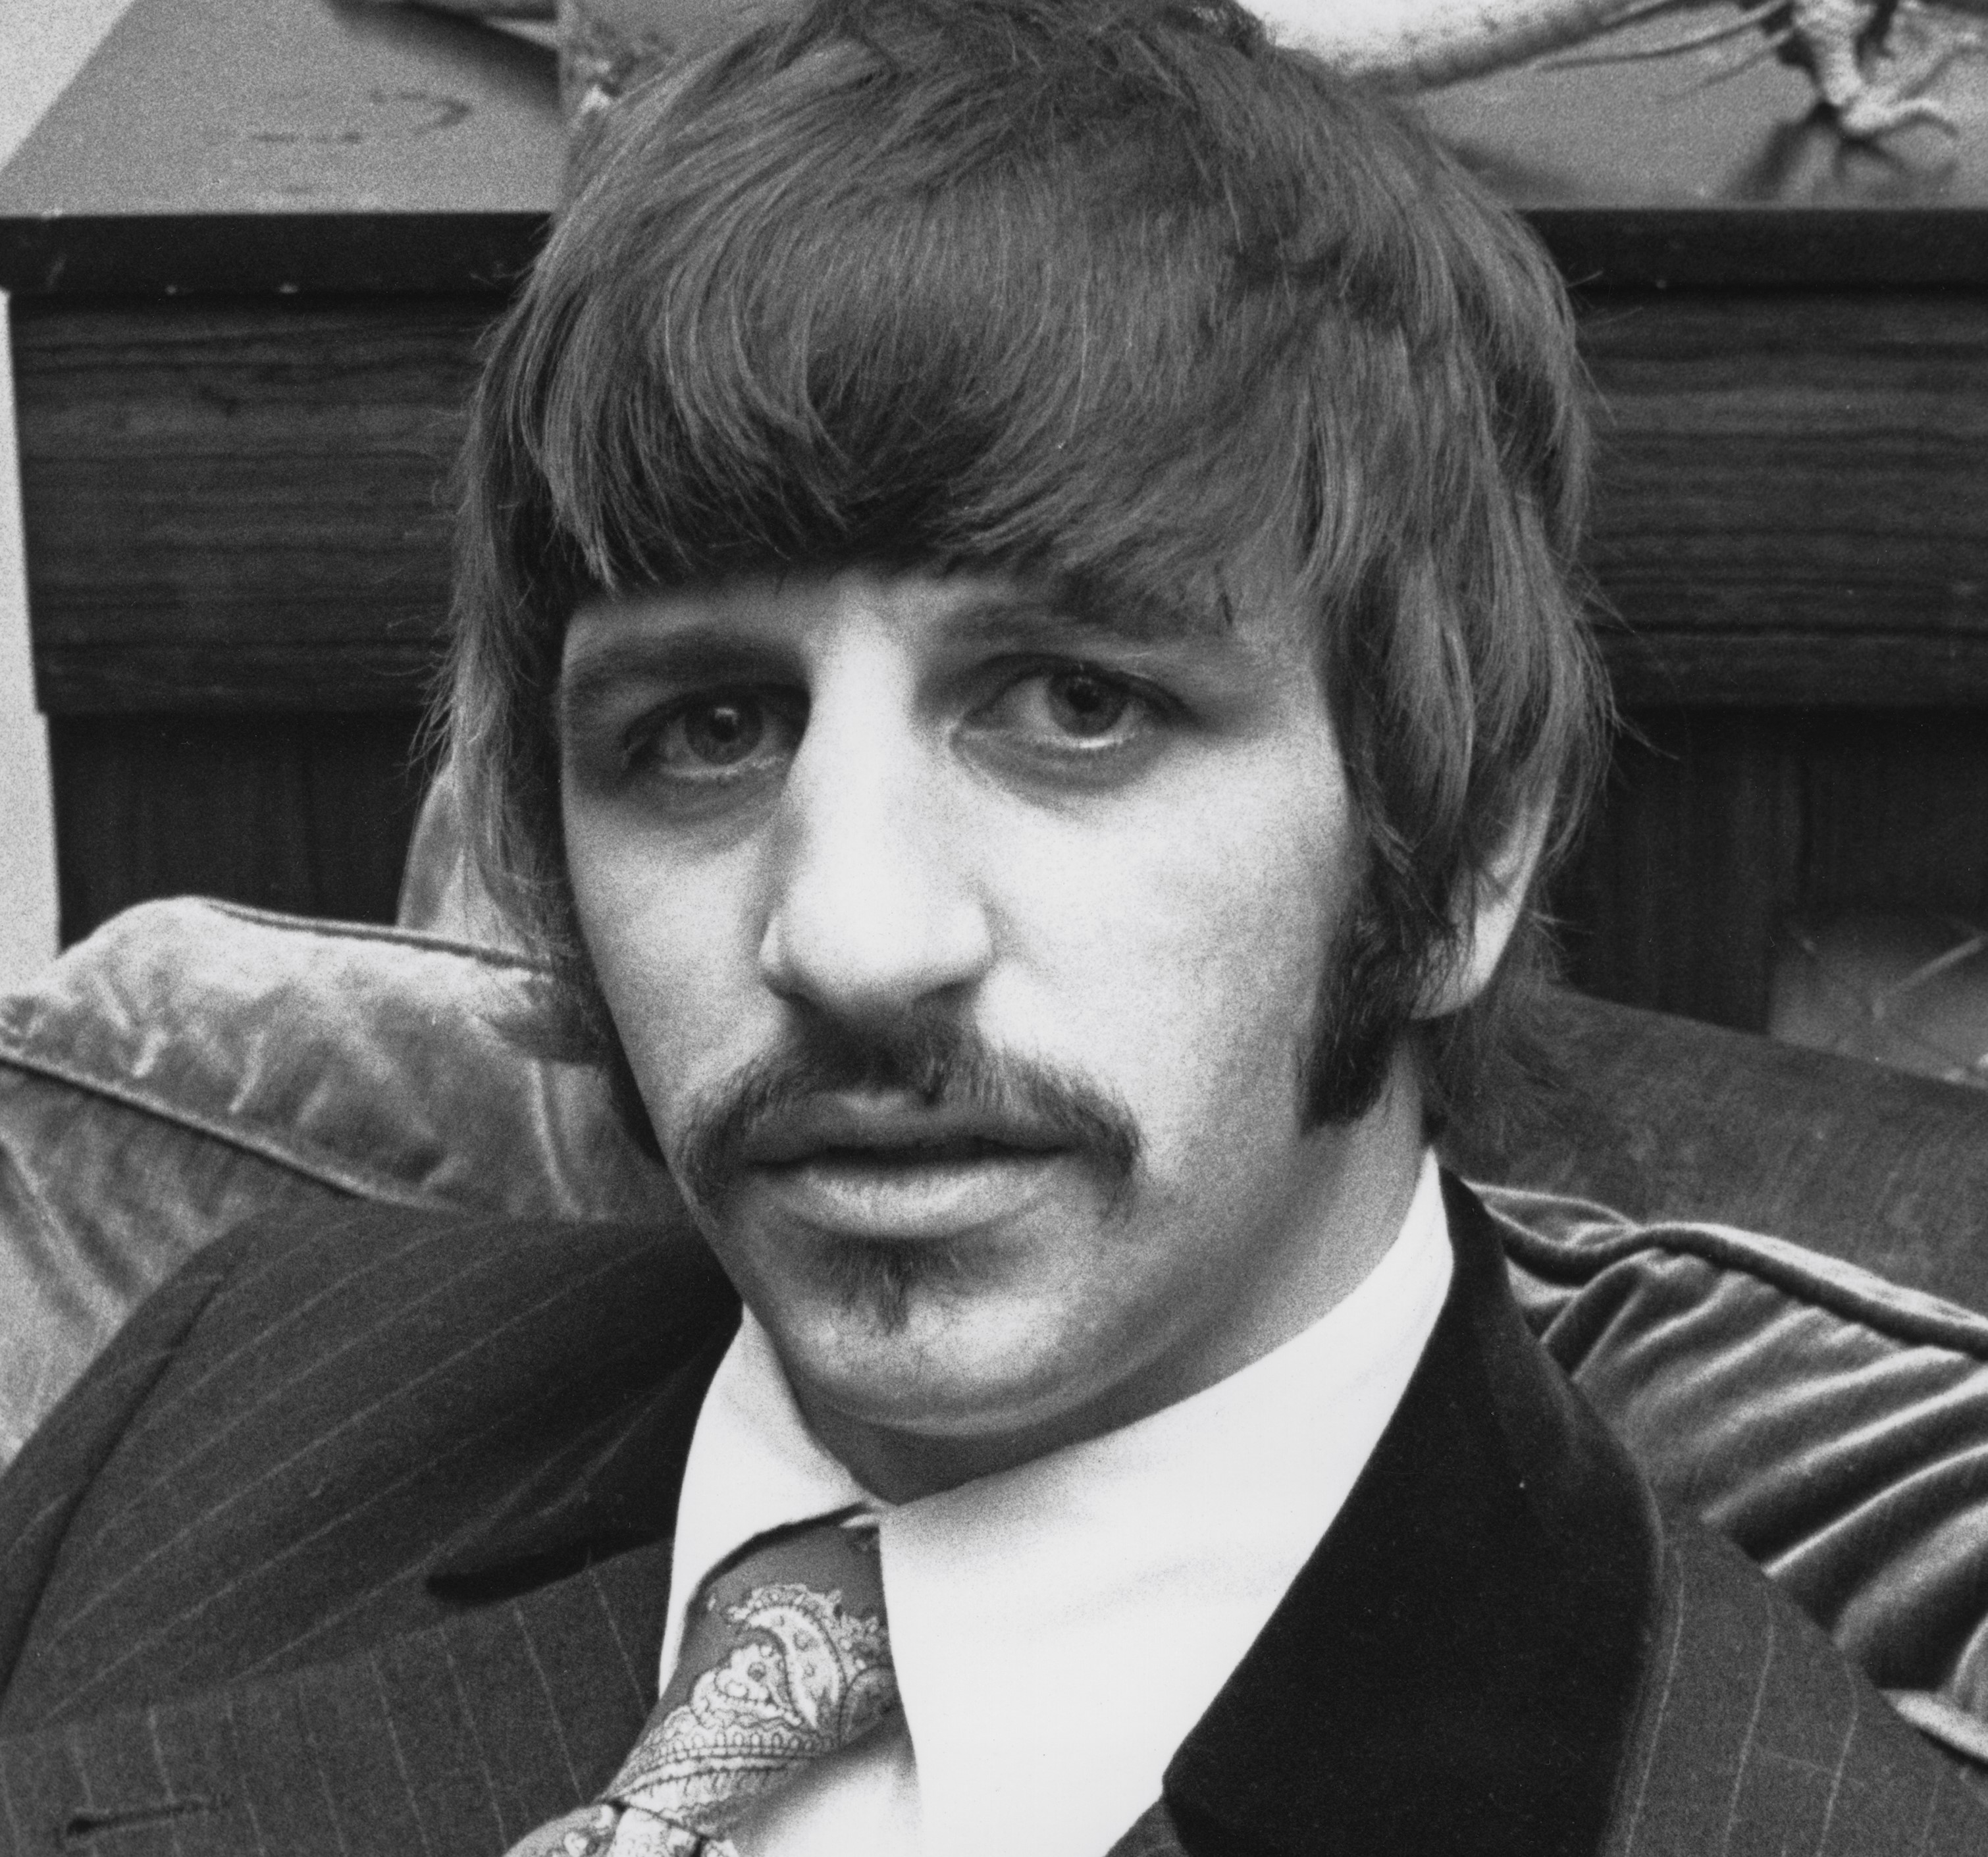 Ringo Starr Said Drummers Aren’t ‘Treated Like Human Beings’